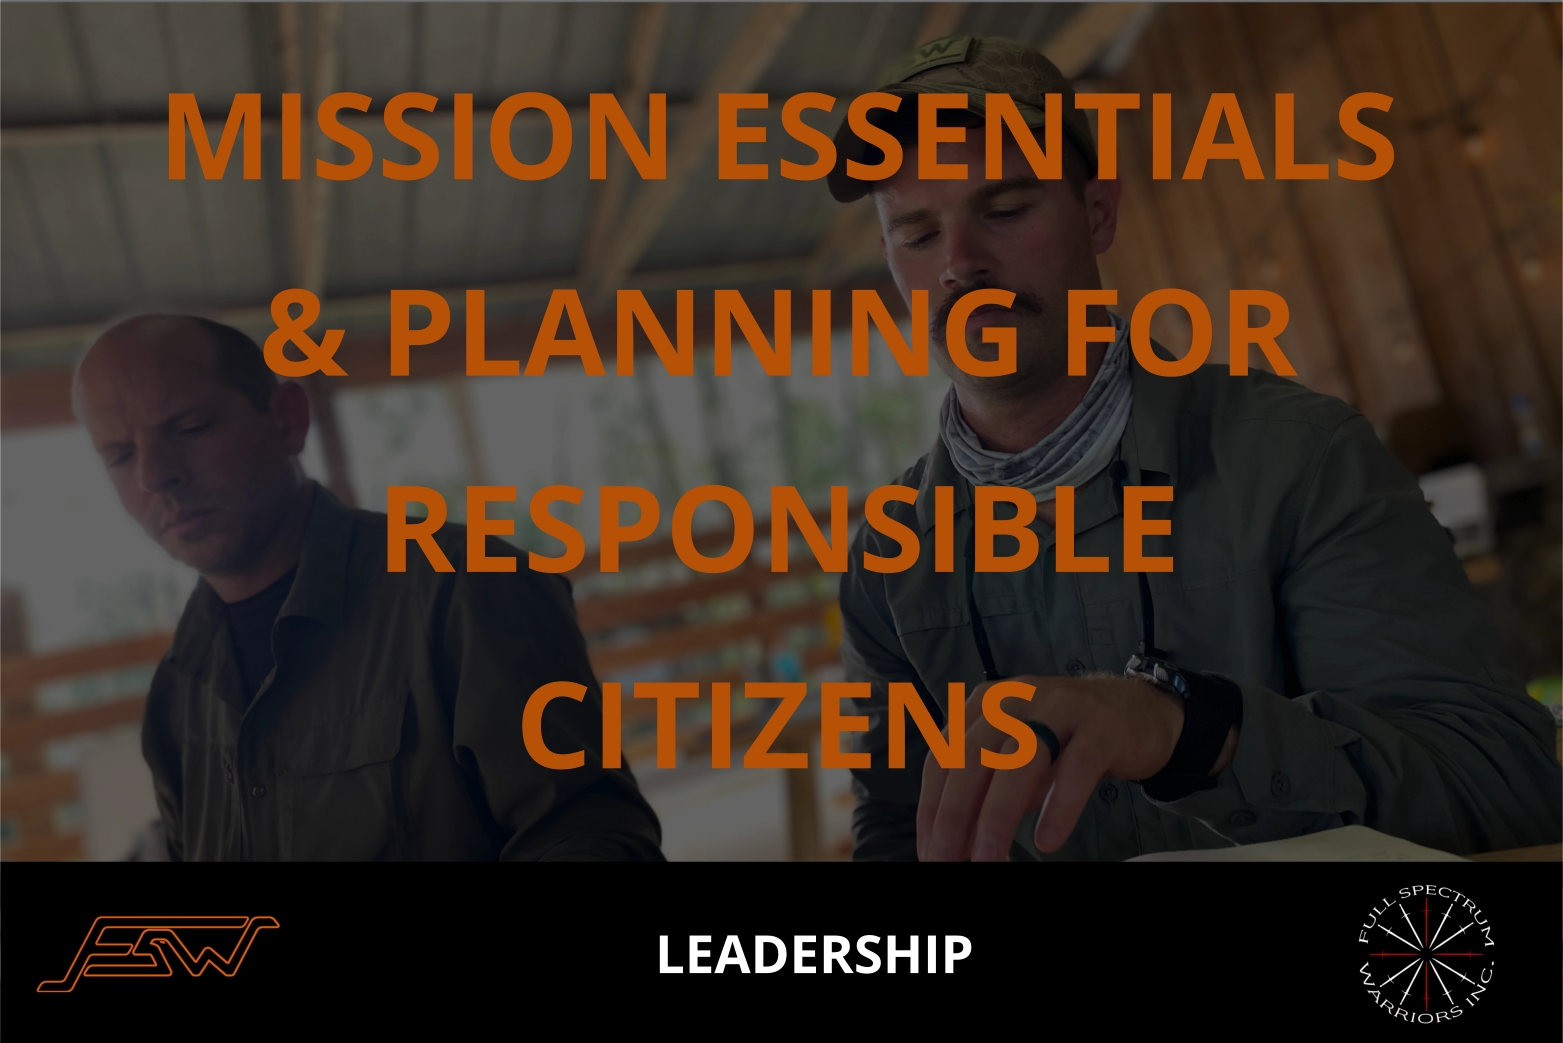 MISSION ESSENTIALS & PLANNING FOR RESPONSIBLE CITIZENS